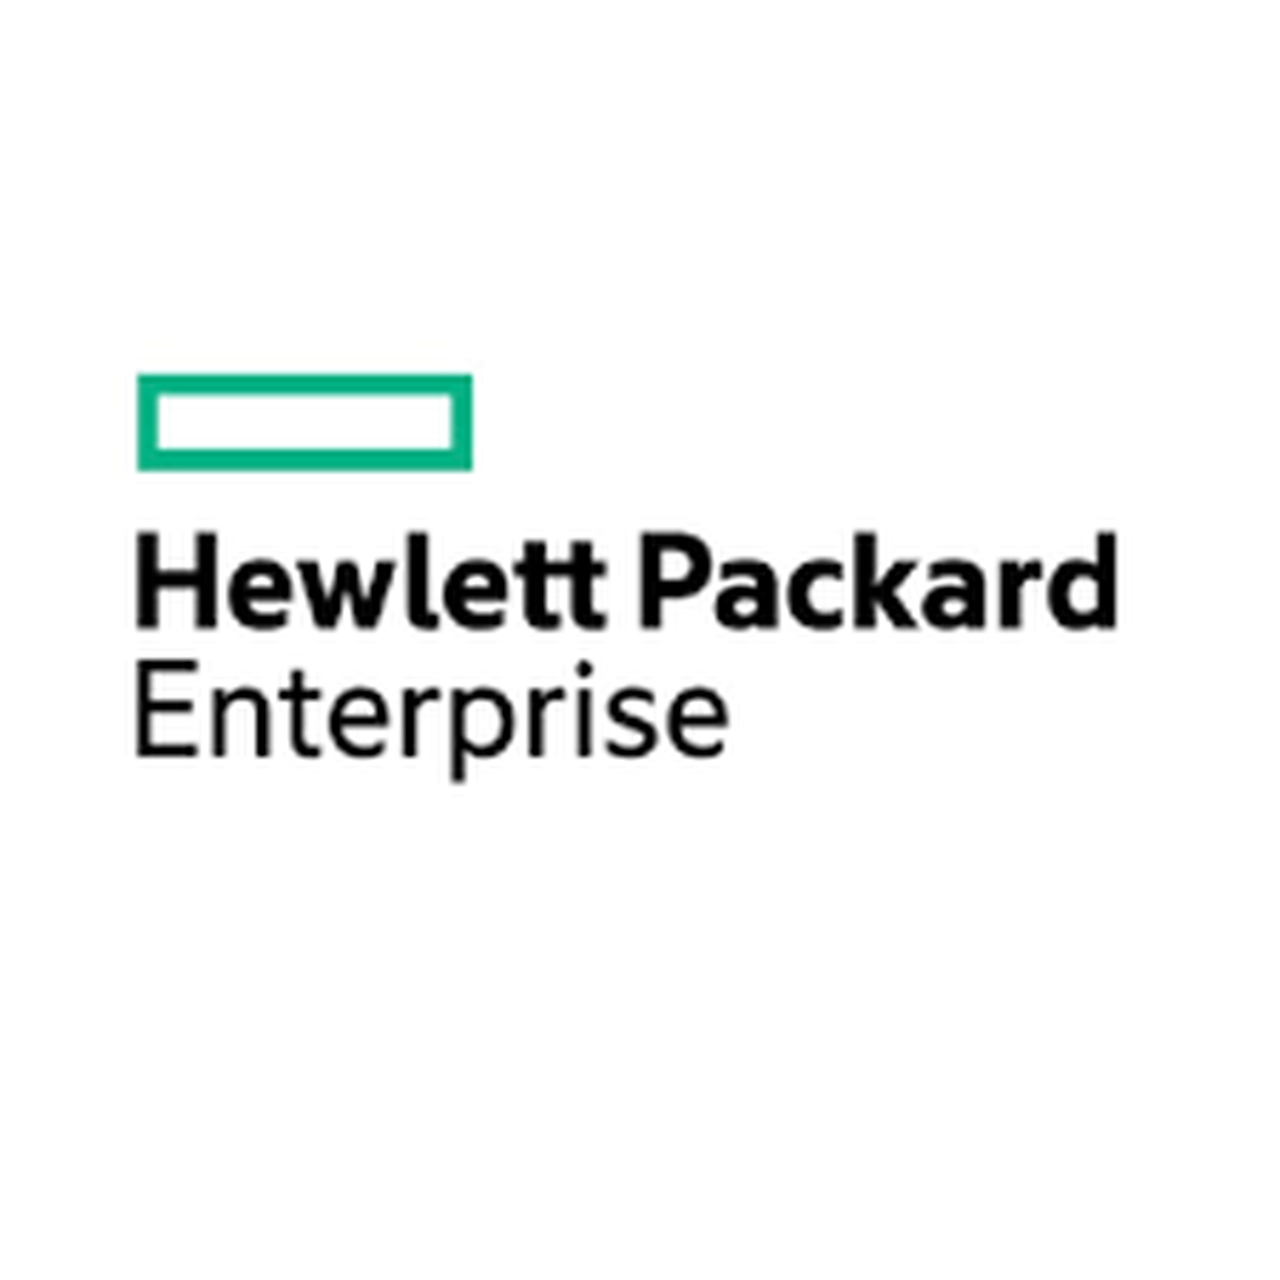 HPE 7500 4-port 10GbE XFP Enhanced Mod Bundled Services Removal